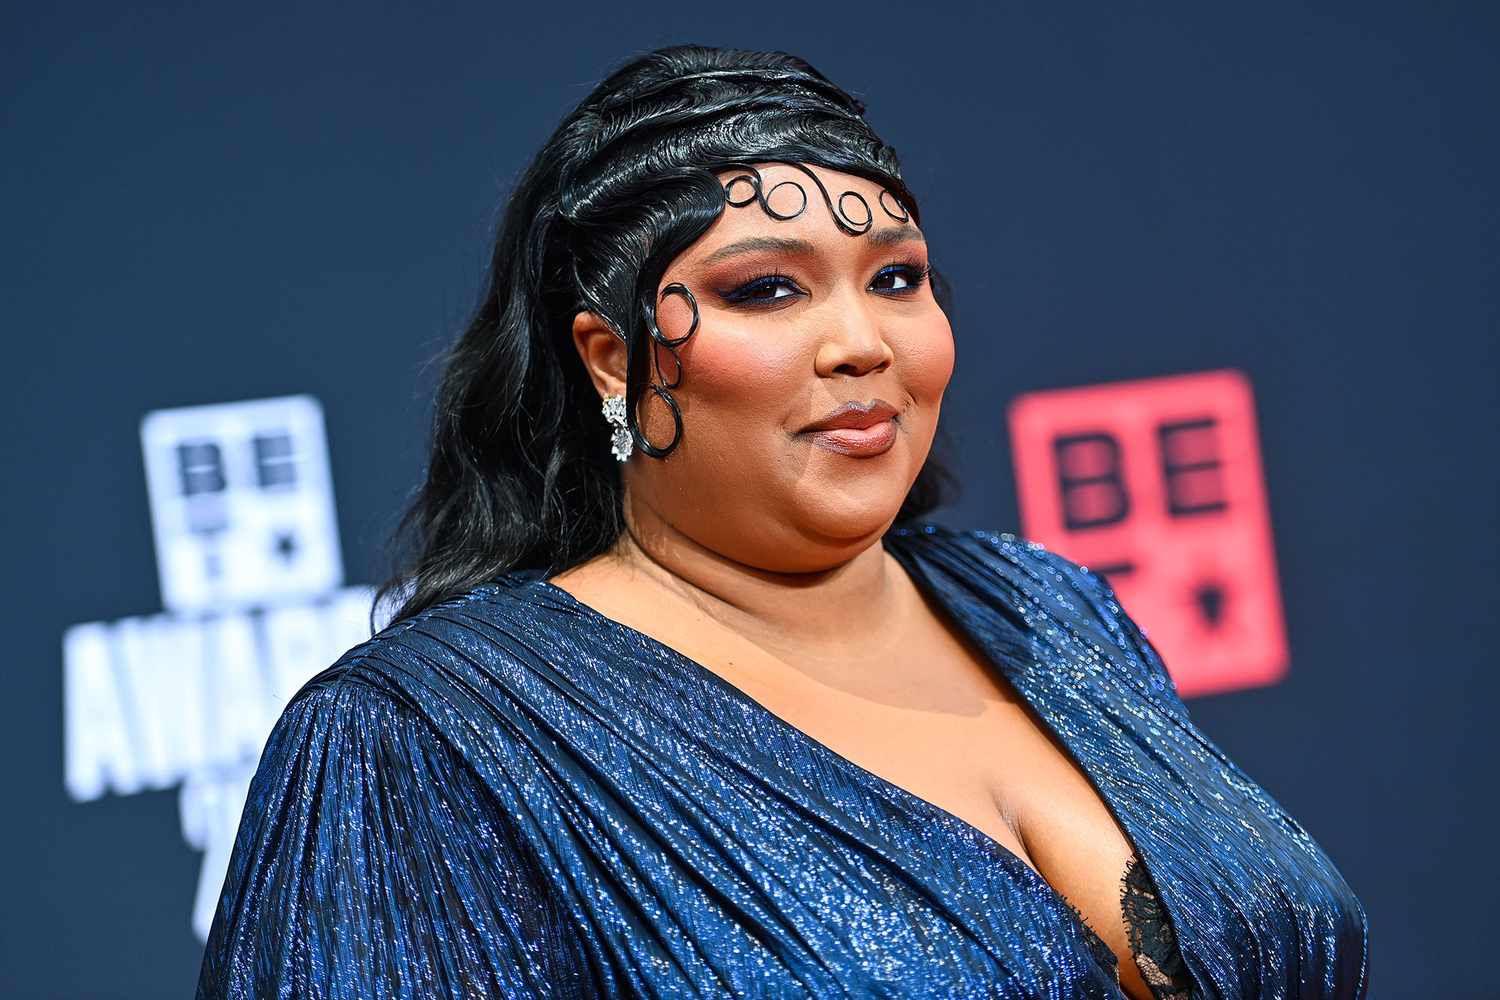 Lizzo Denies Turning Down Cameo For Jennifer Lopez Movie, Claims She Wasn’t Asked